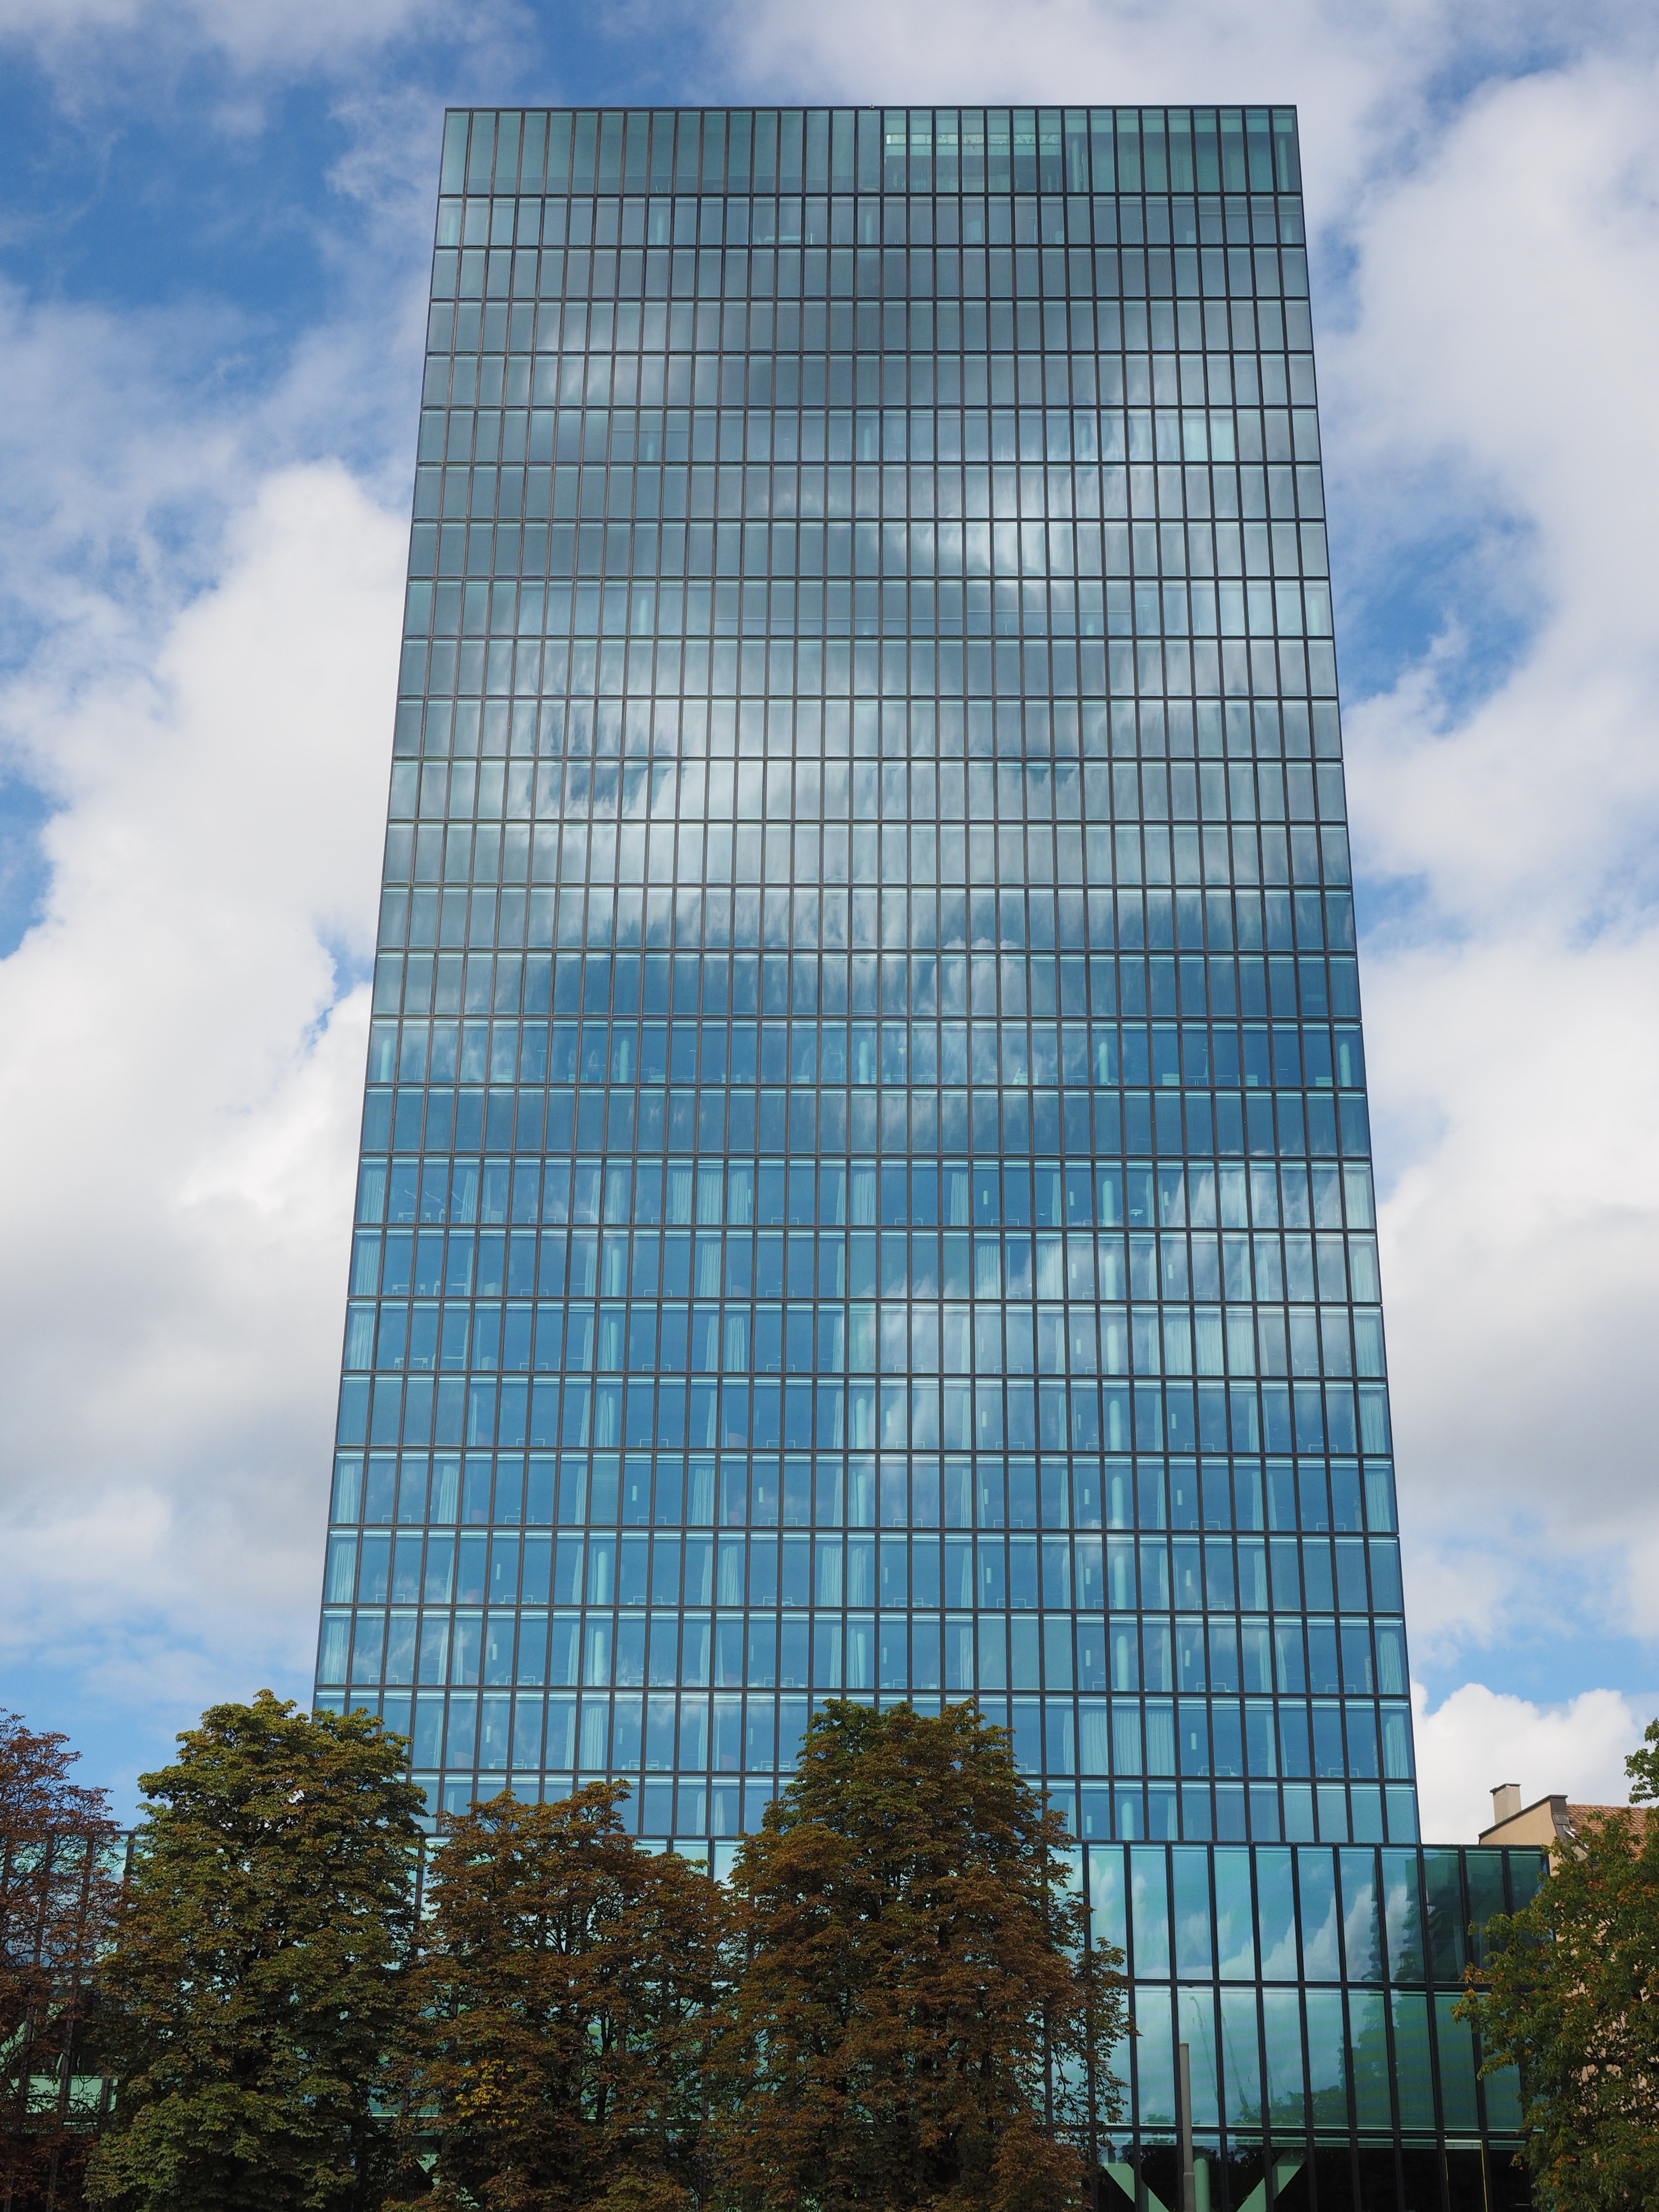 White Frame Glass High Rise Building Under Clear Blue Sky · Free ...